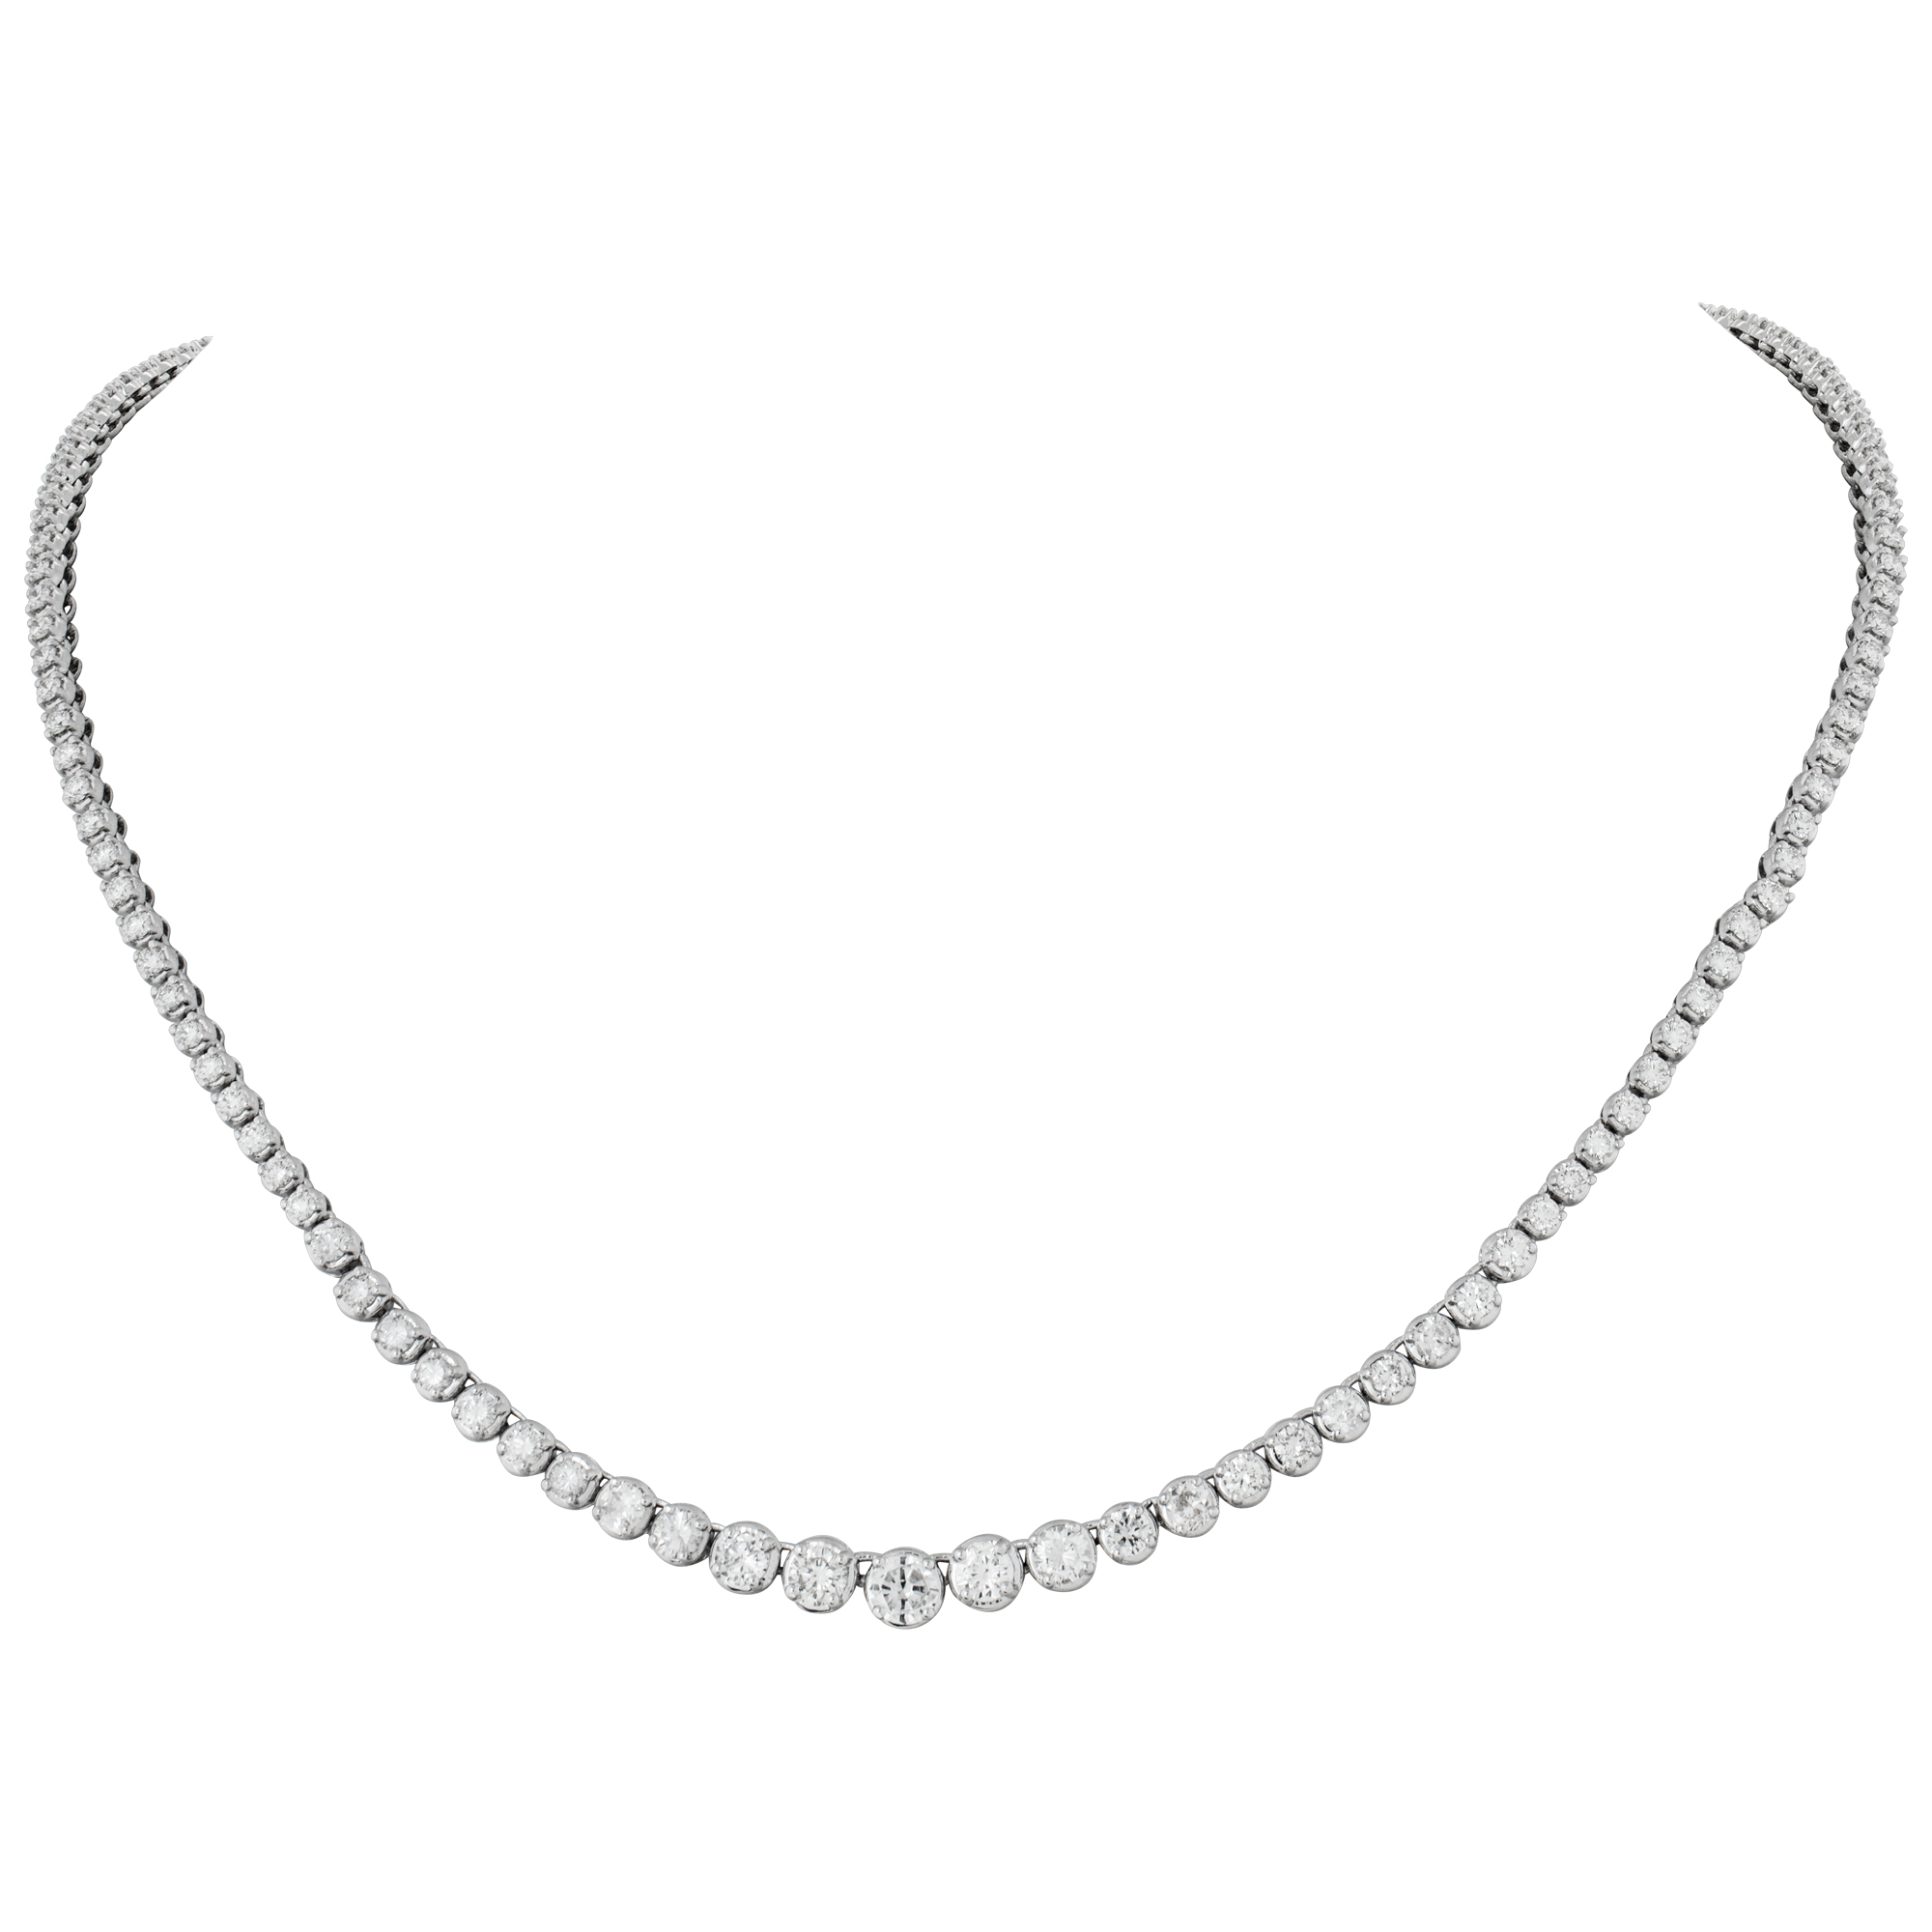 Diamond tennis necklace 6 carats in 18k white gold image 1